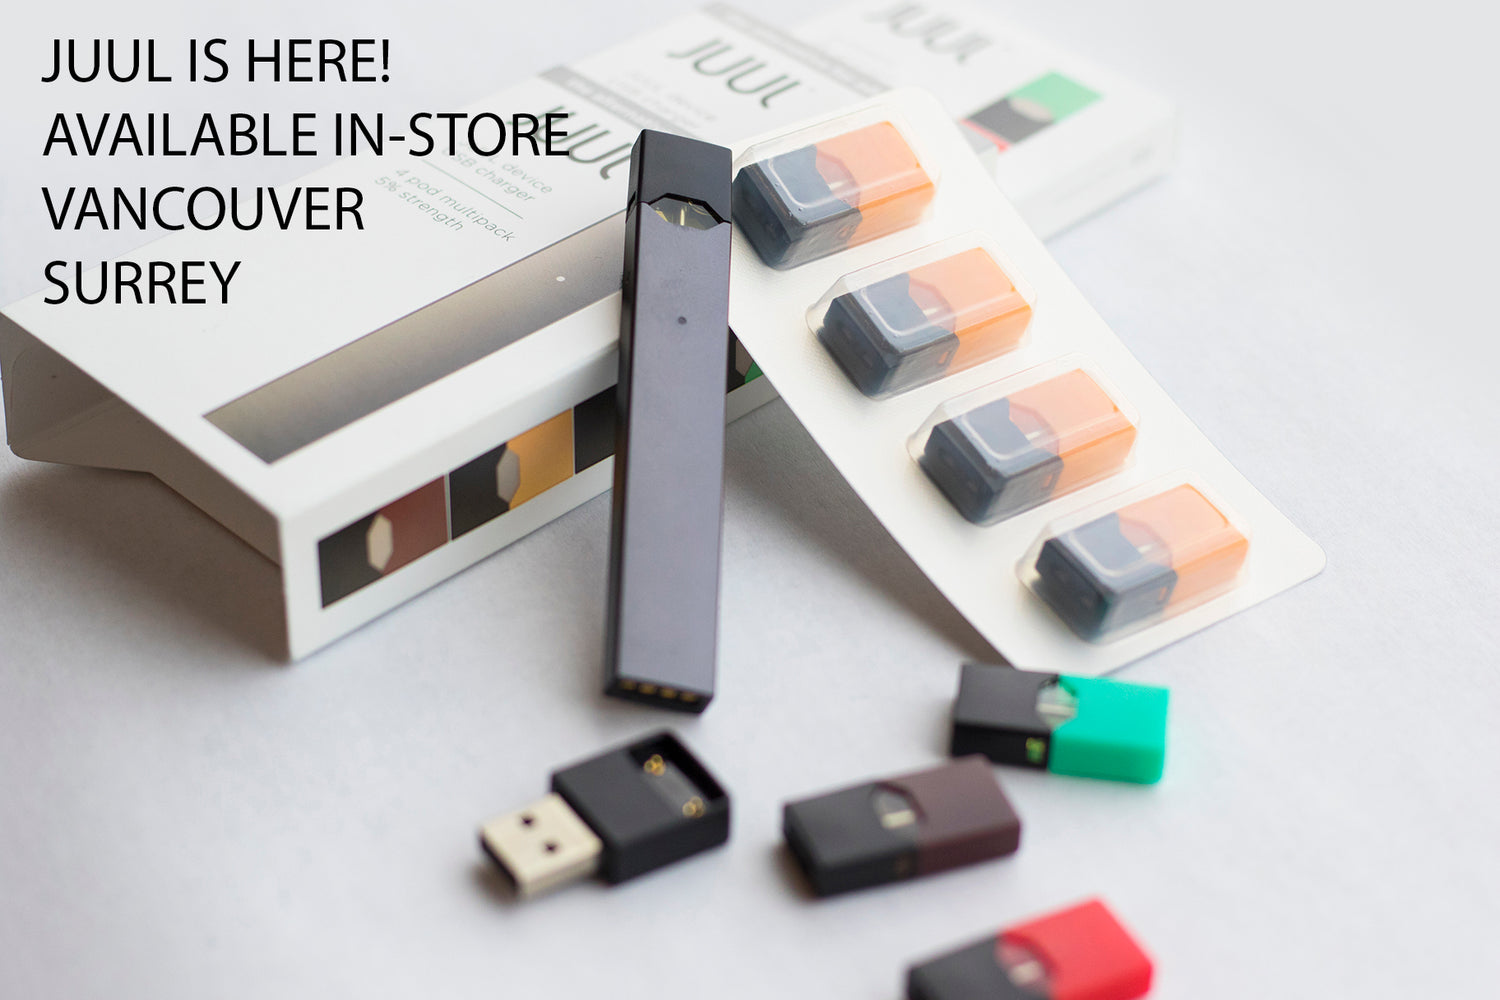 JUUL HAS ARRIVED! AVAILABLE INSTORE